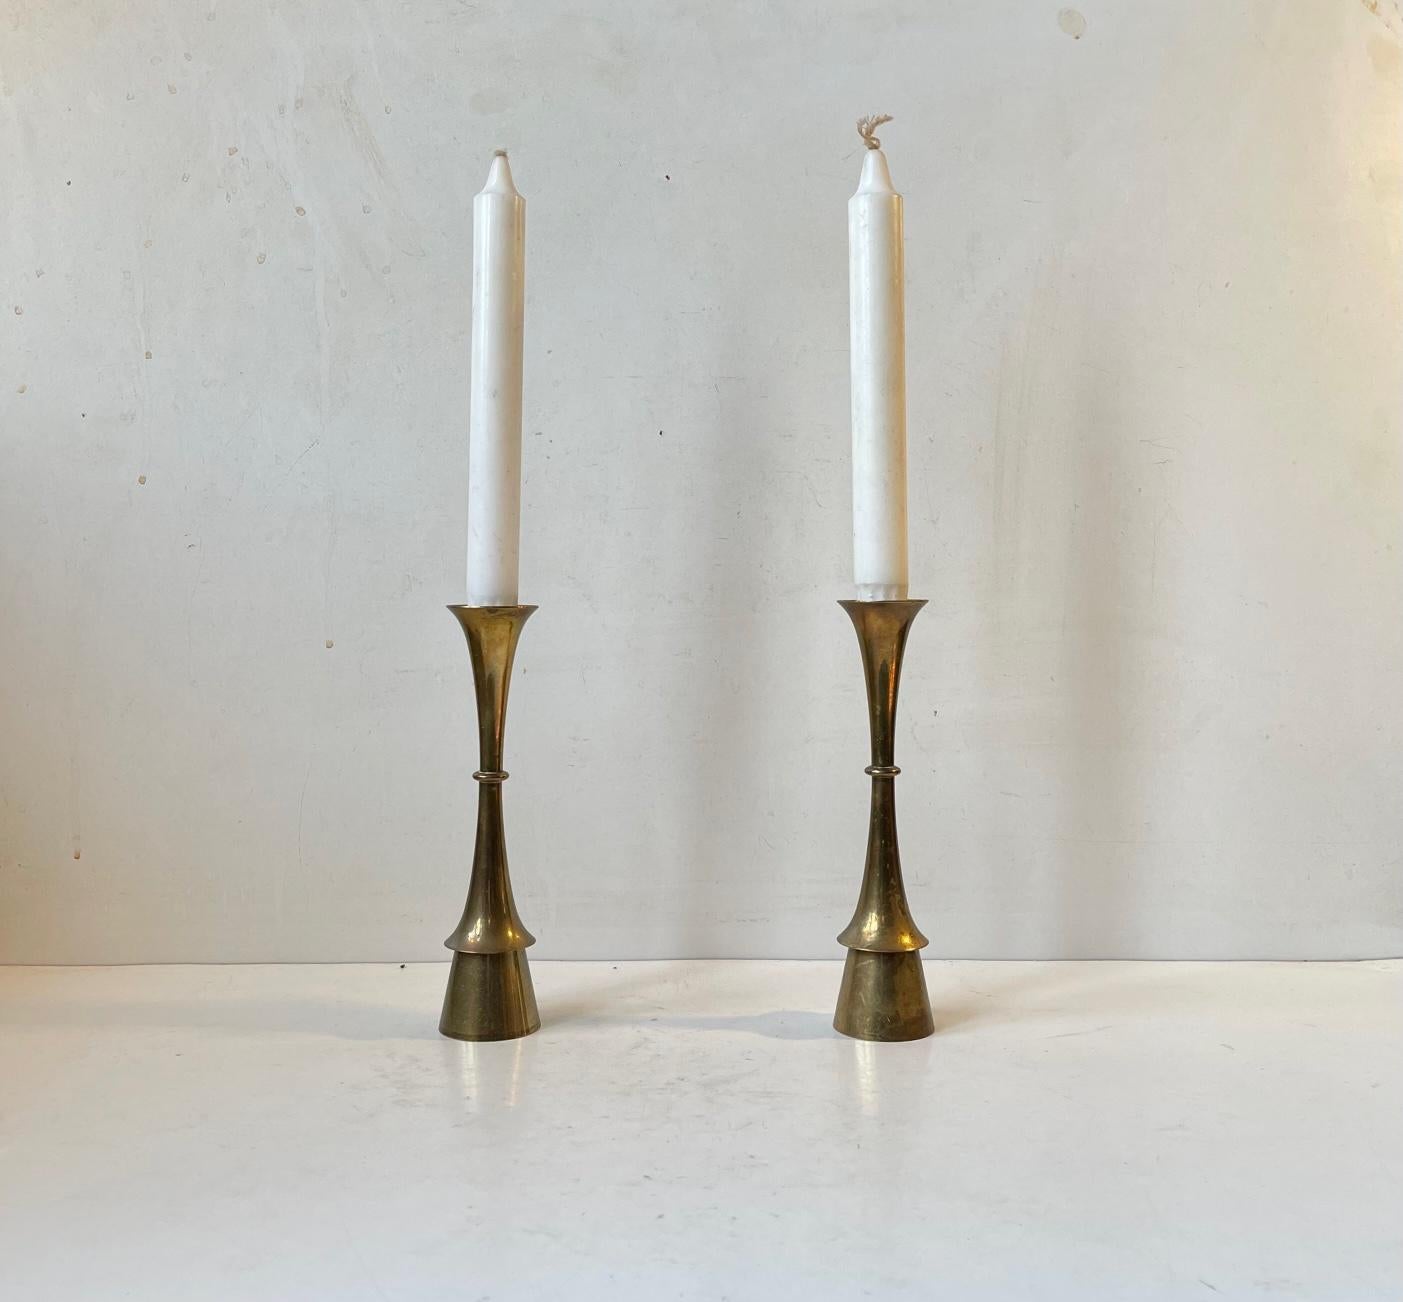 A pair of solid brass candlesticks designed and manufactured by Hyslop in Copenhagen, Denmark during the 1960s. The candlesticks are to be fitted with regular sixed candles. They have not been polished recently and display patina. The style of this